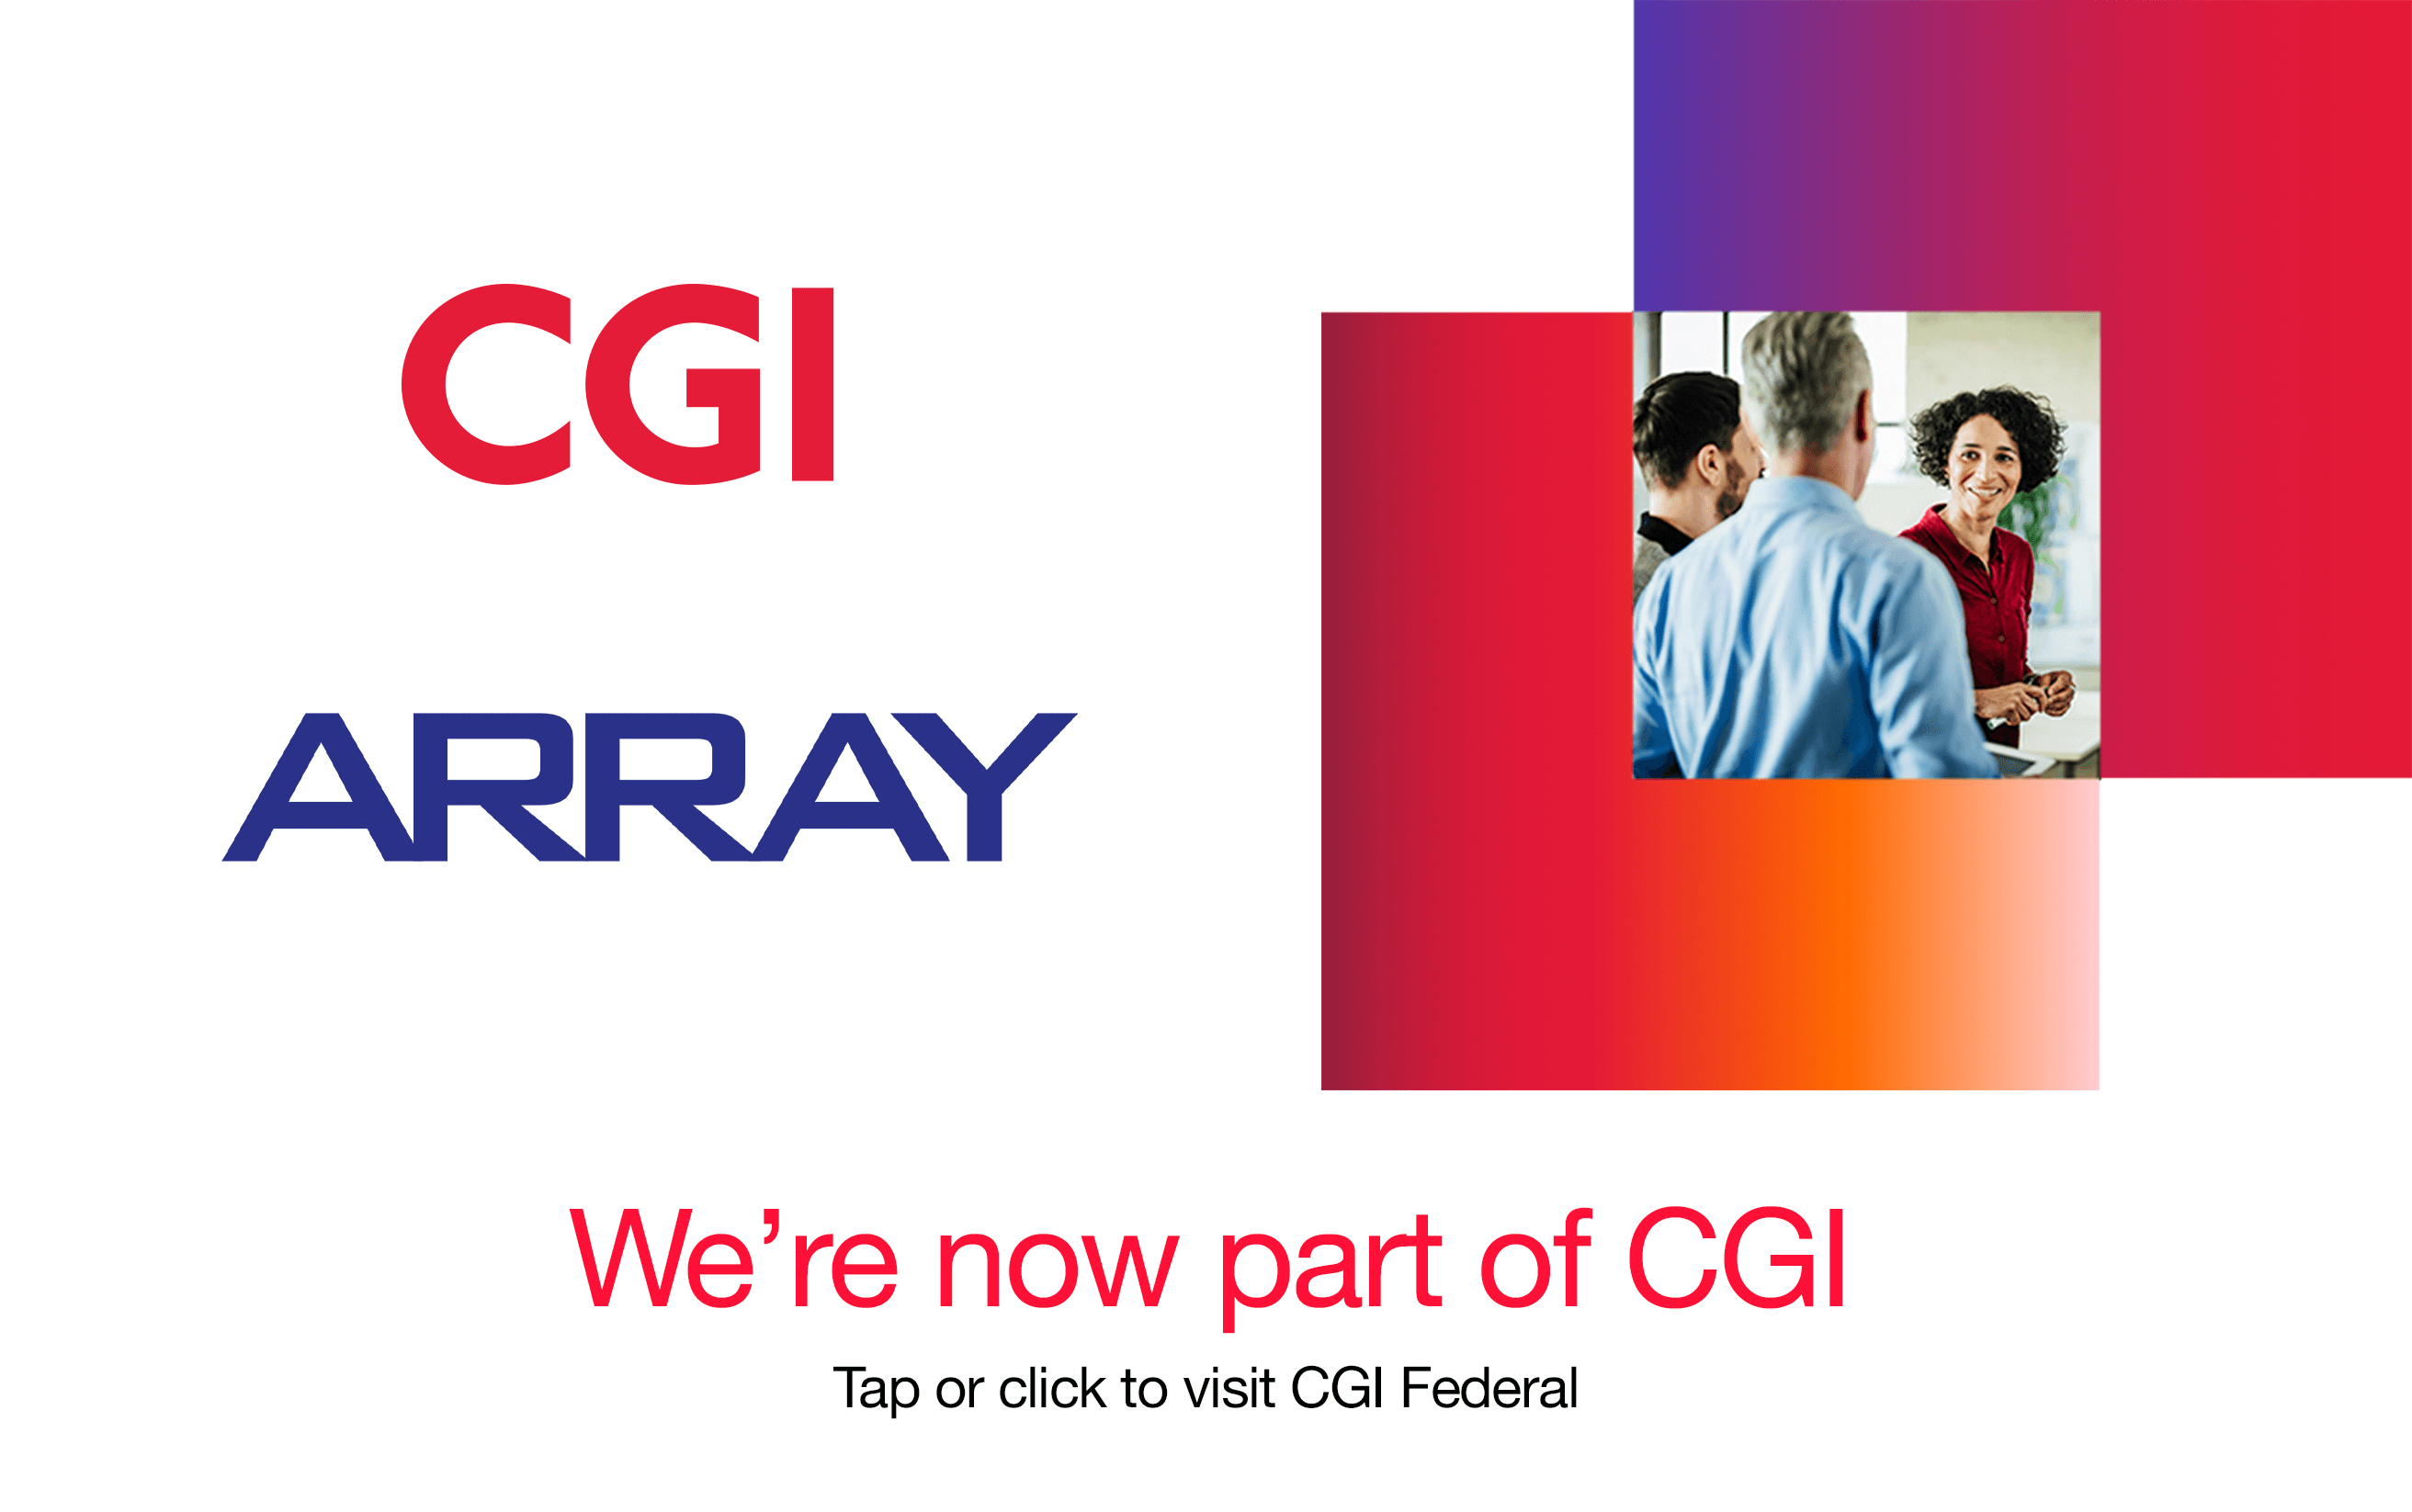 ARRAY now part of CGI graphic